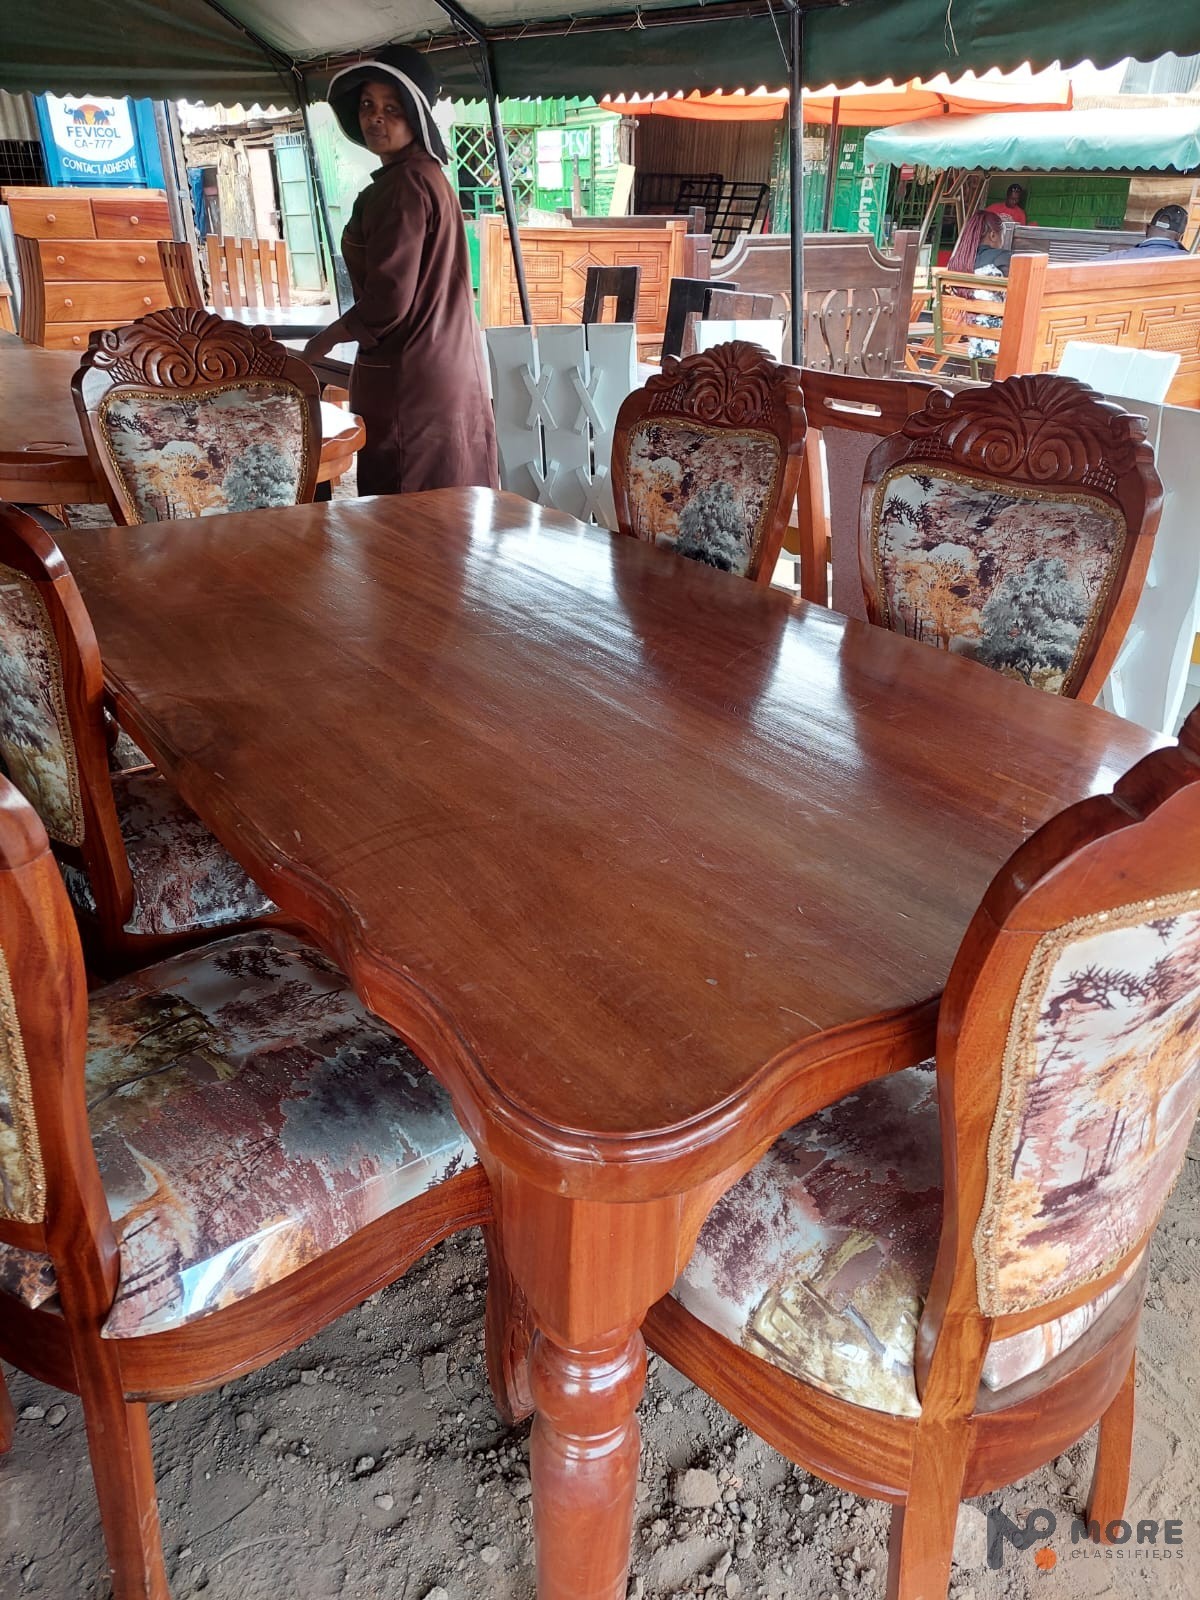 Six seater Dinning table at Ngongroad racecourse